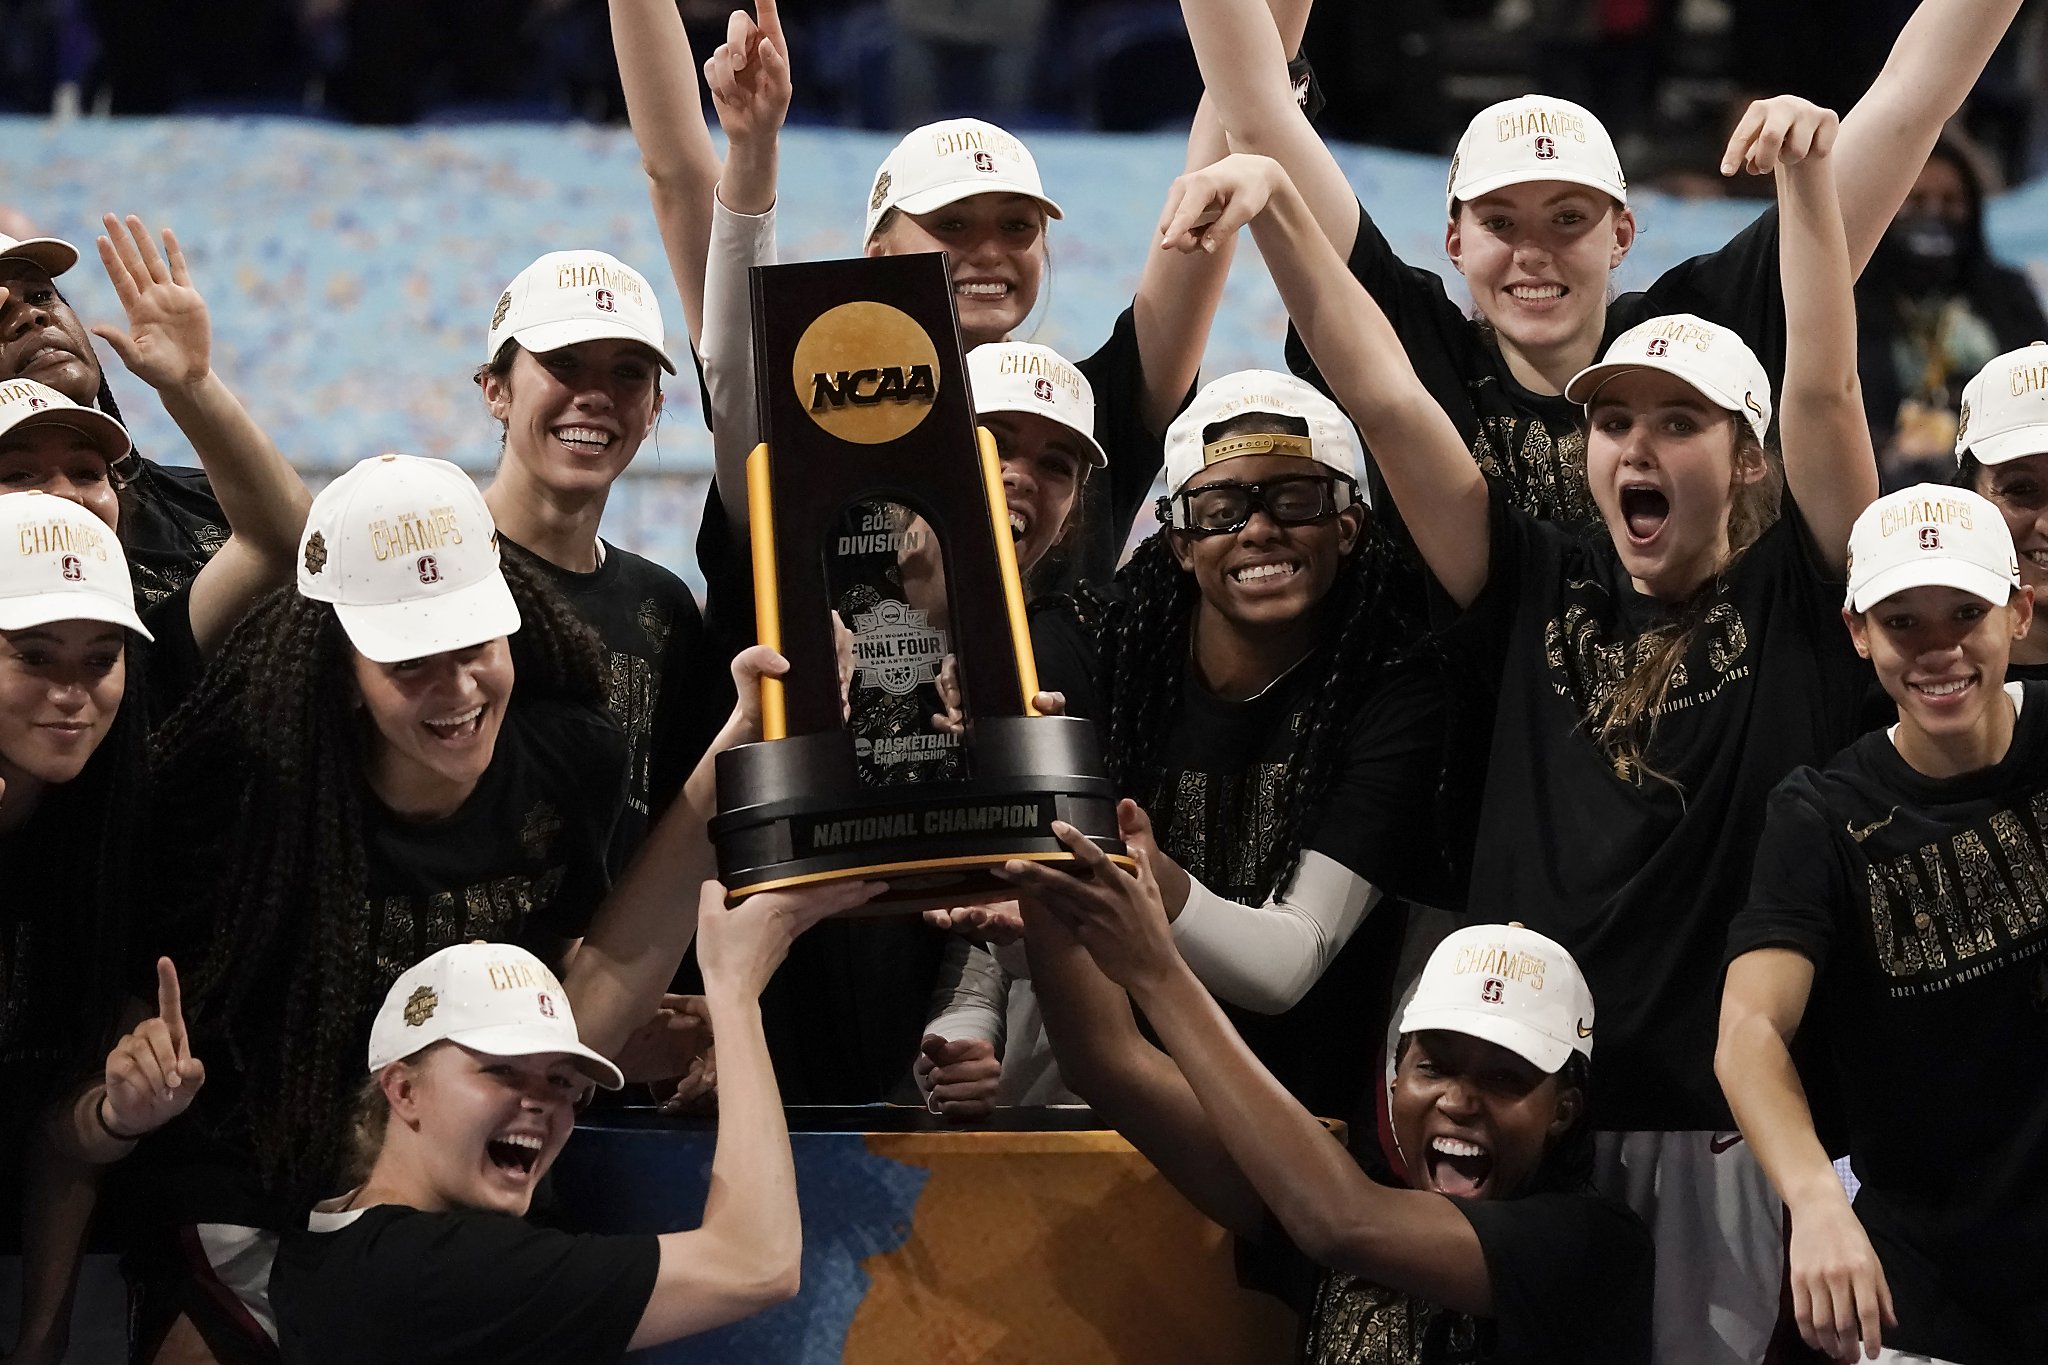 Title drought ends with Tara VanDerveer, Stanford again national champions